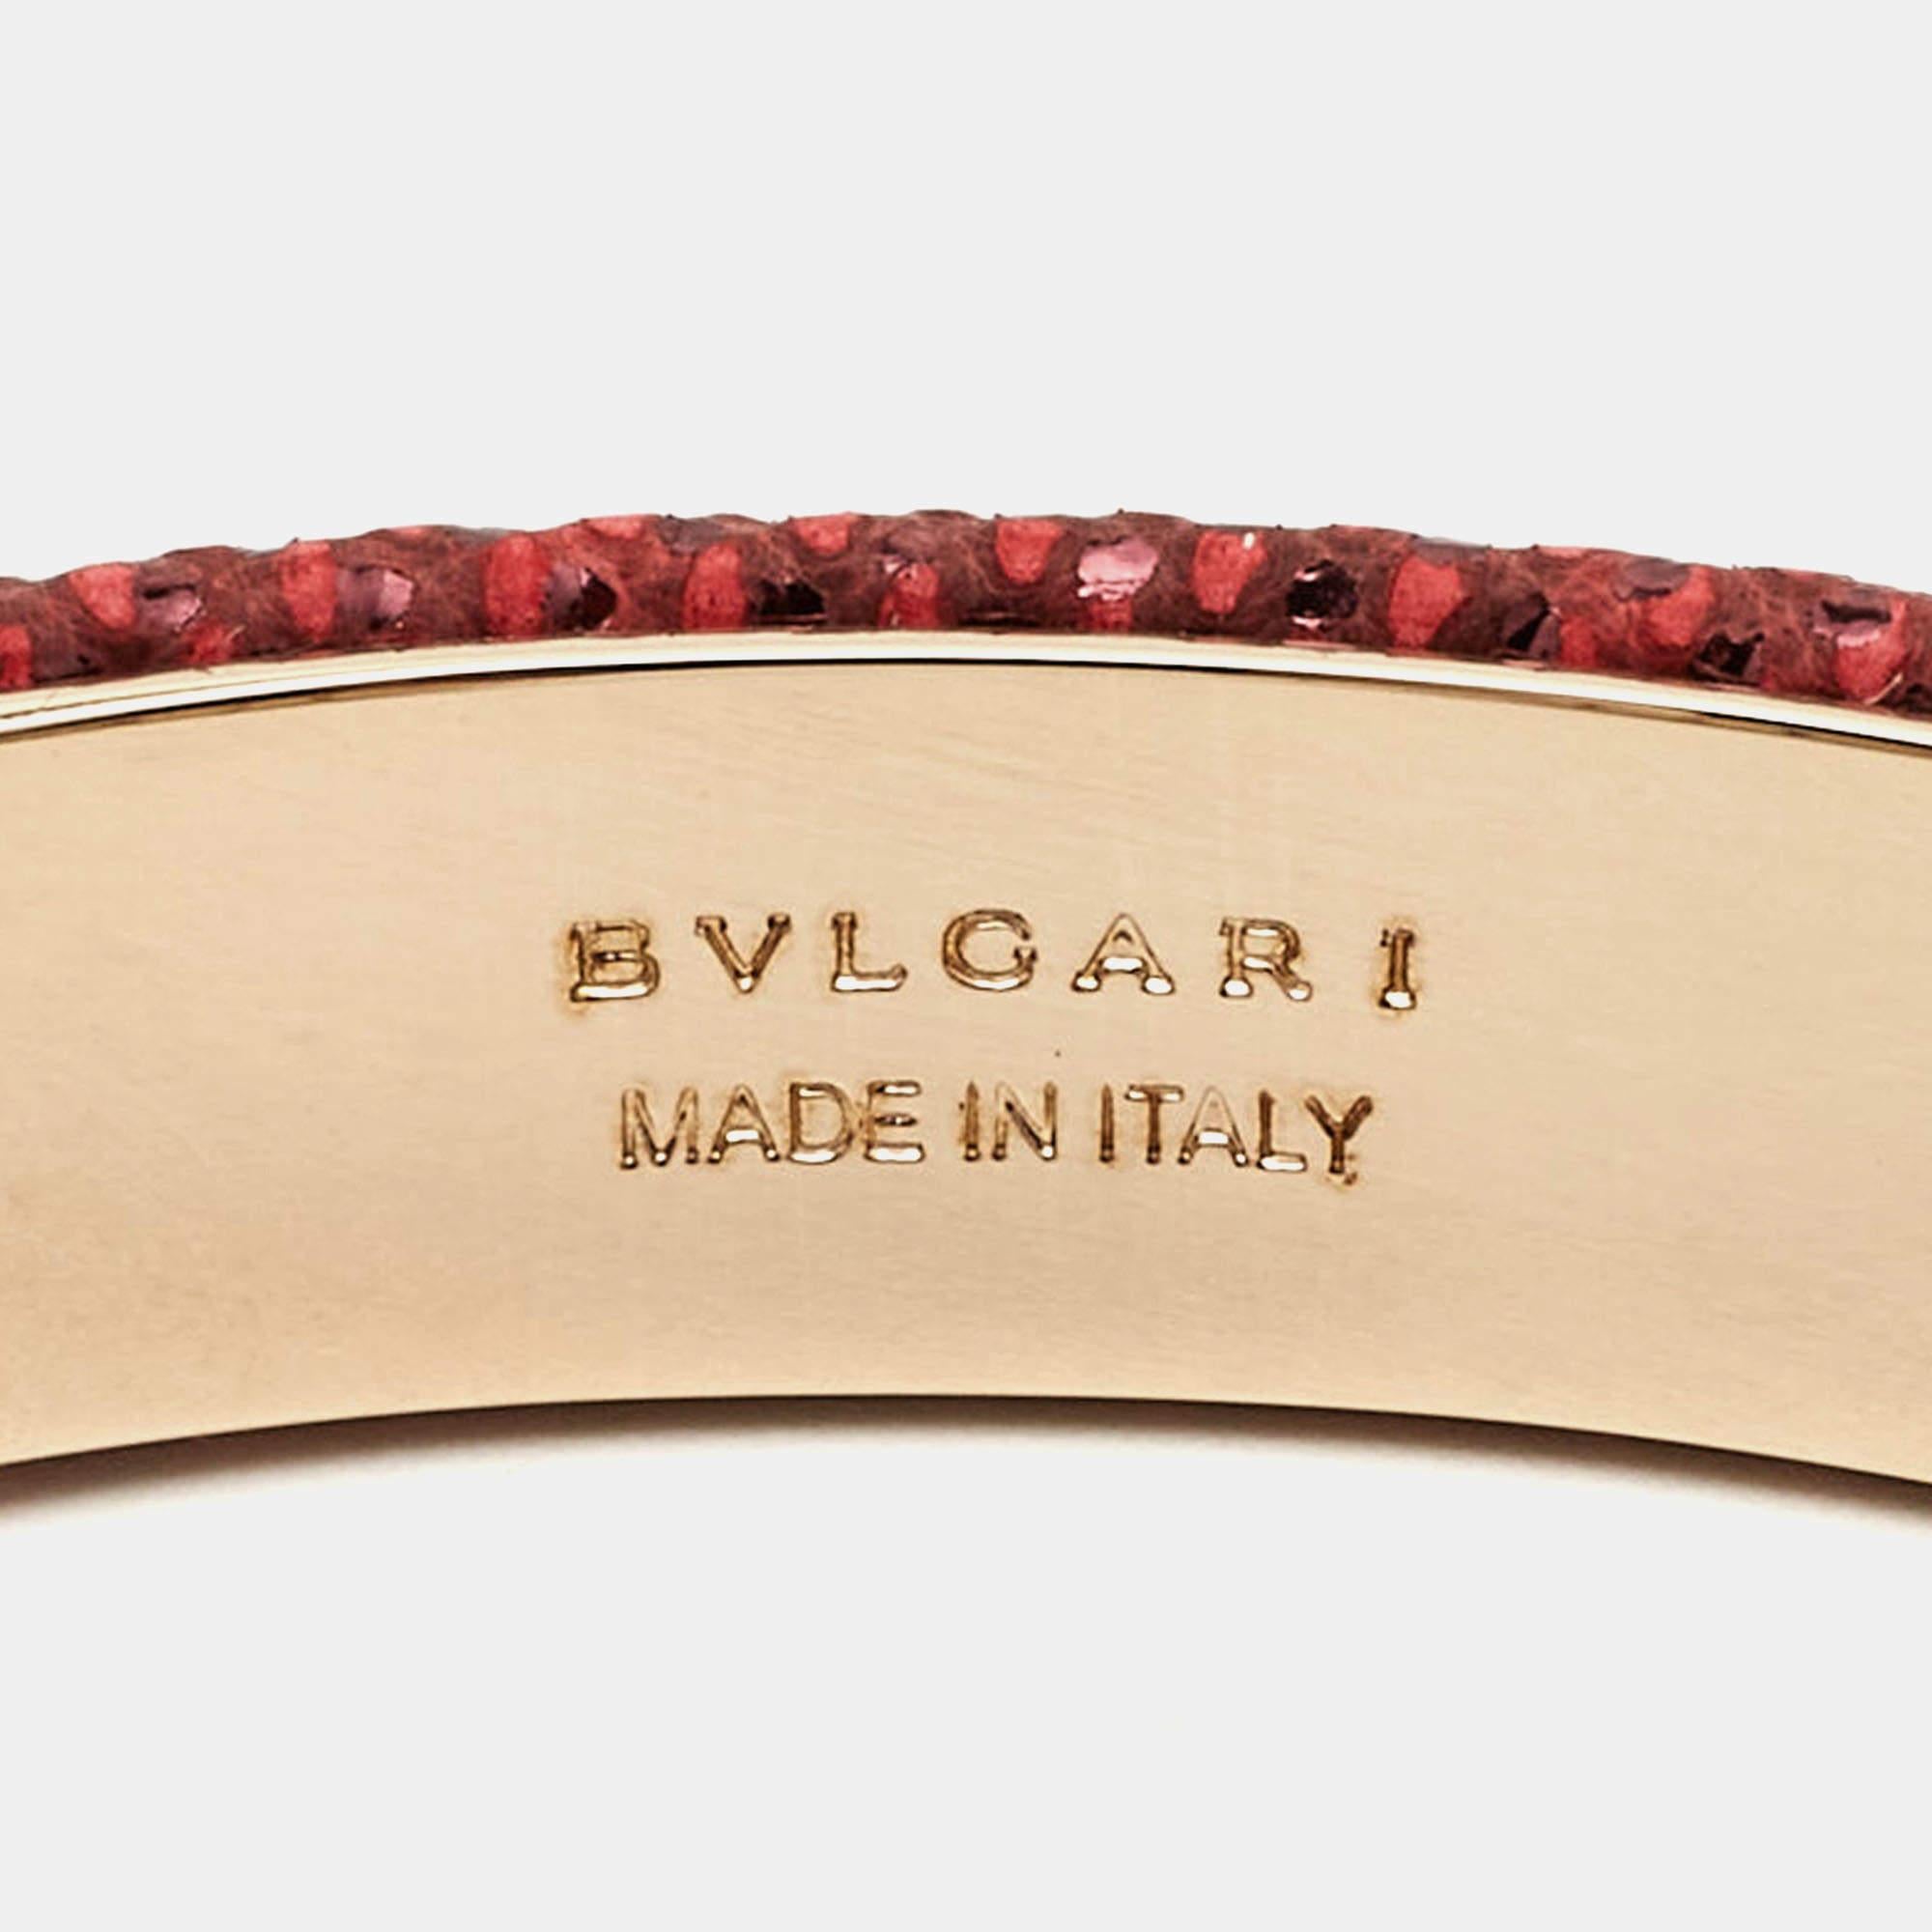 This iconic Bvlgari Serpenti Forever bracelet is finely crafted in enamel and snakeskin leather. It has an open-cuff shape with decorative snake heads on its tips.

Includes: Original Box, Authenticity Card, Info Booklet